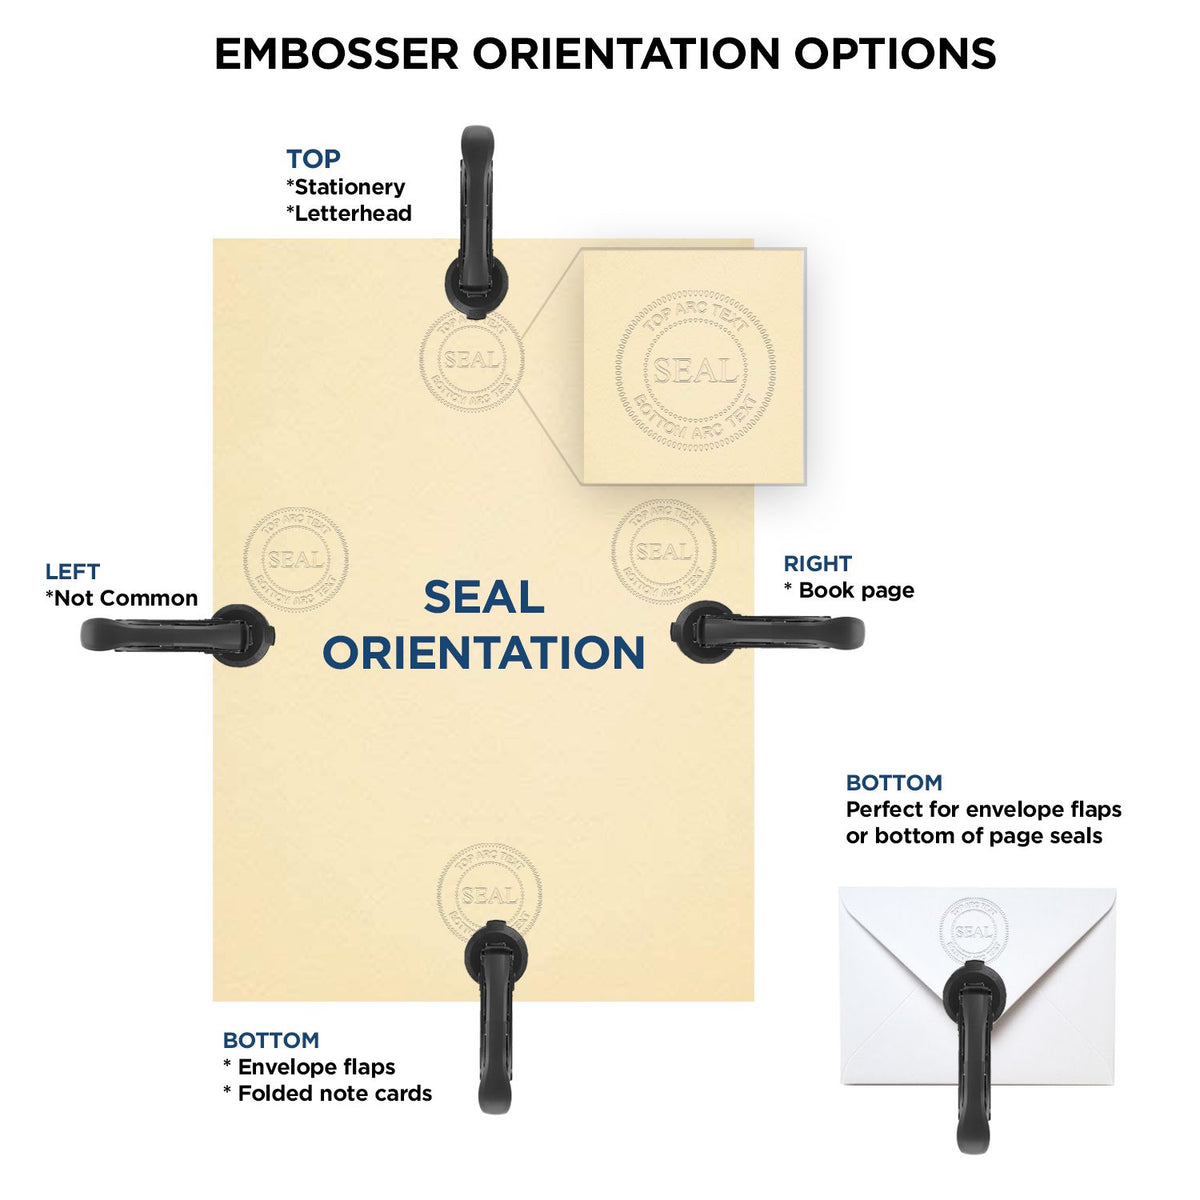 An infographic for the Heavy Duty Cast Iron Arizona Geologist Seal Embosser showing embosser orientation, this is showing examples of a top, bottom, right and left insert.